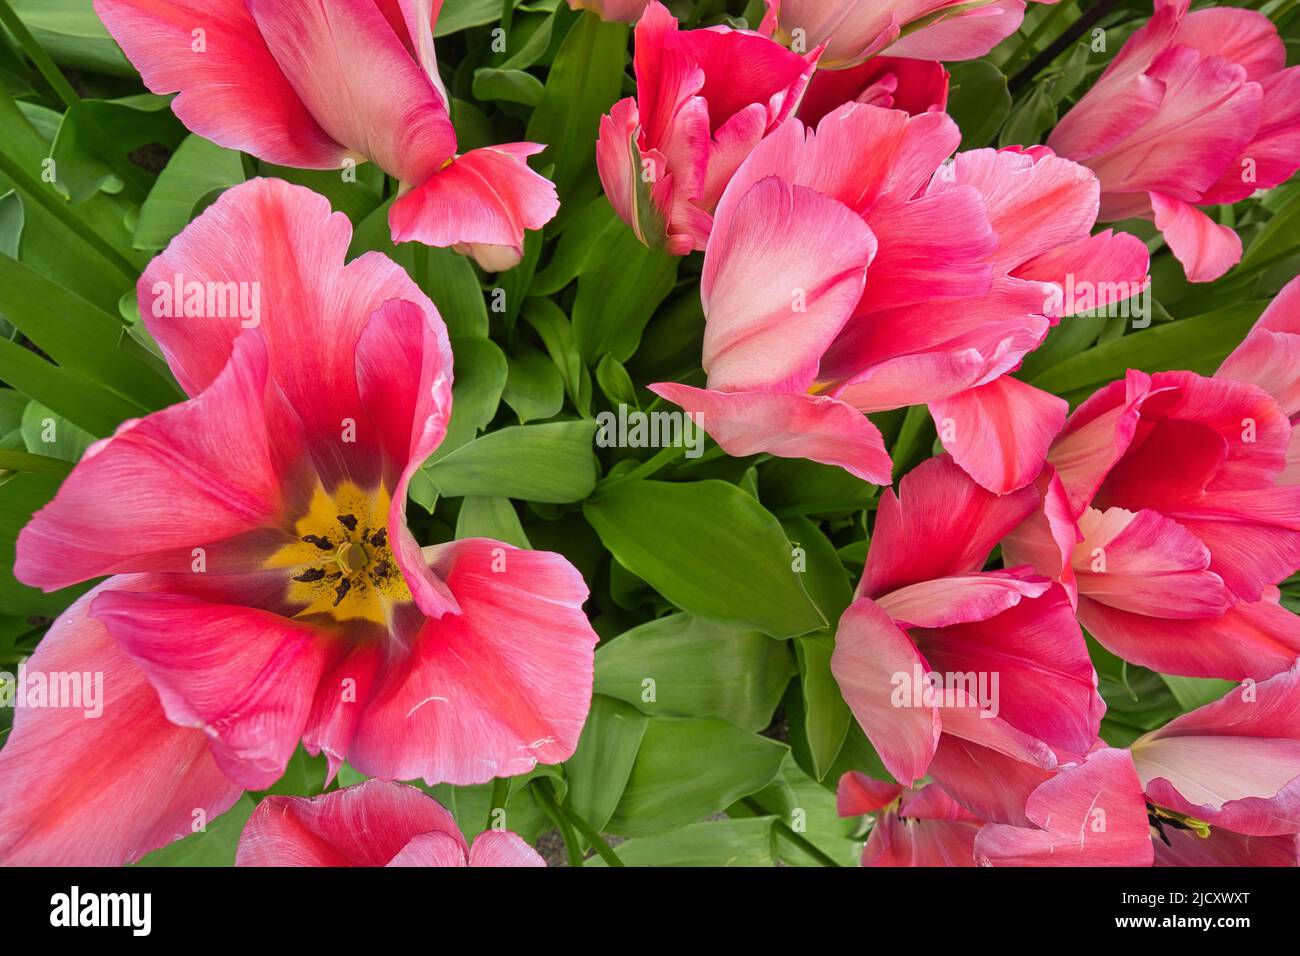 Pink flowers photographed from above with an open flower blossom Stock Photo